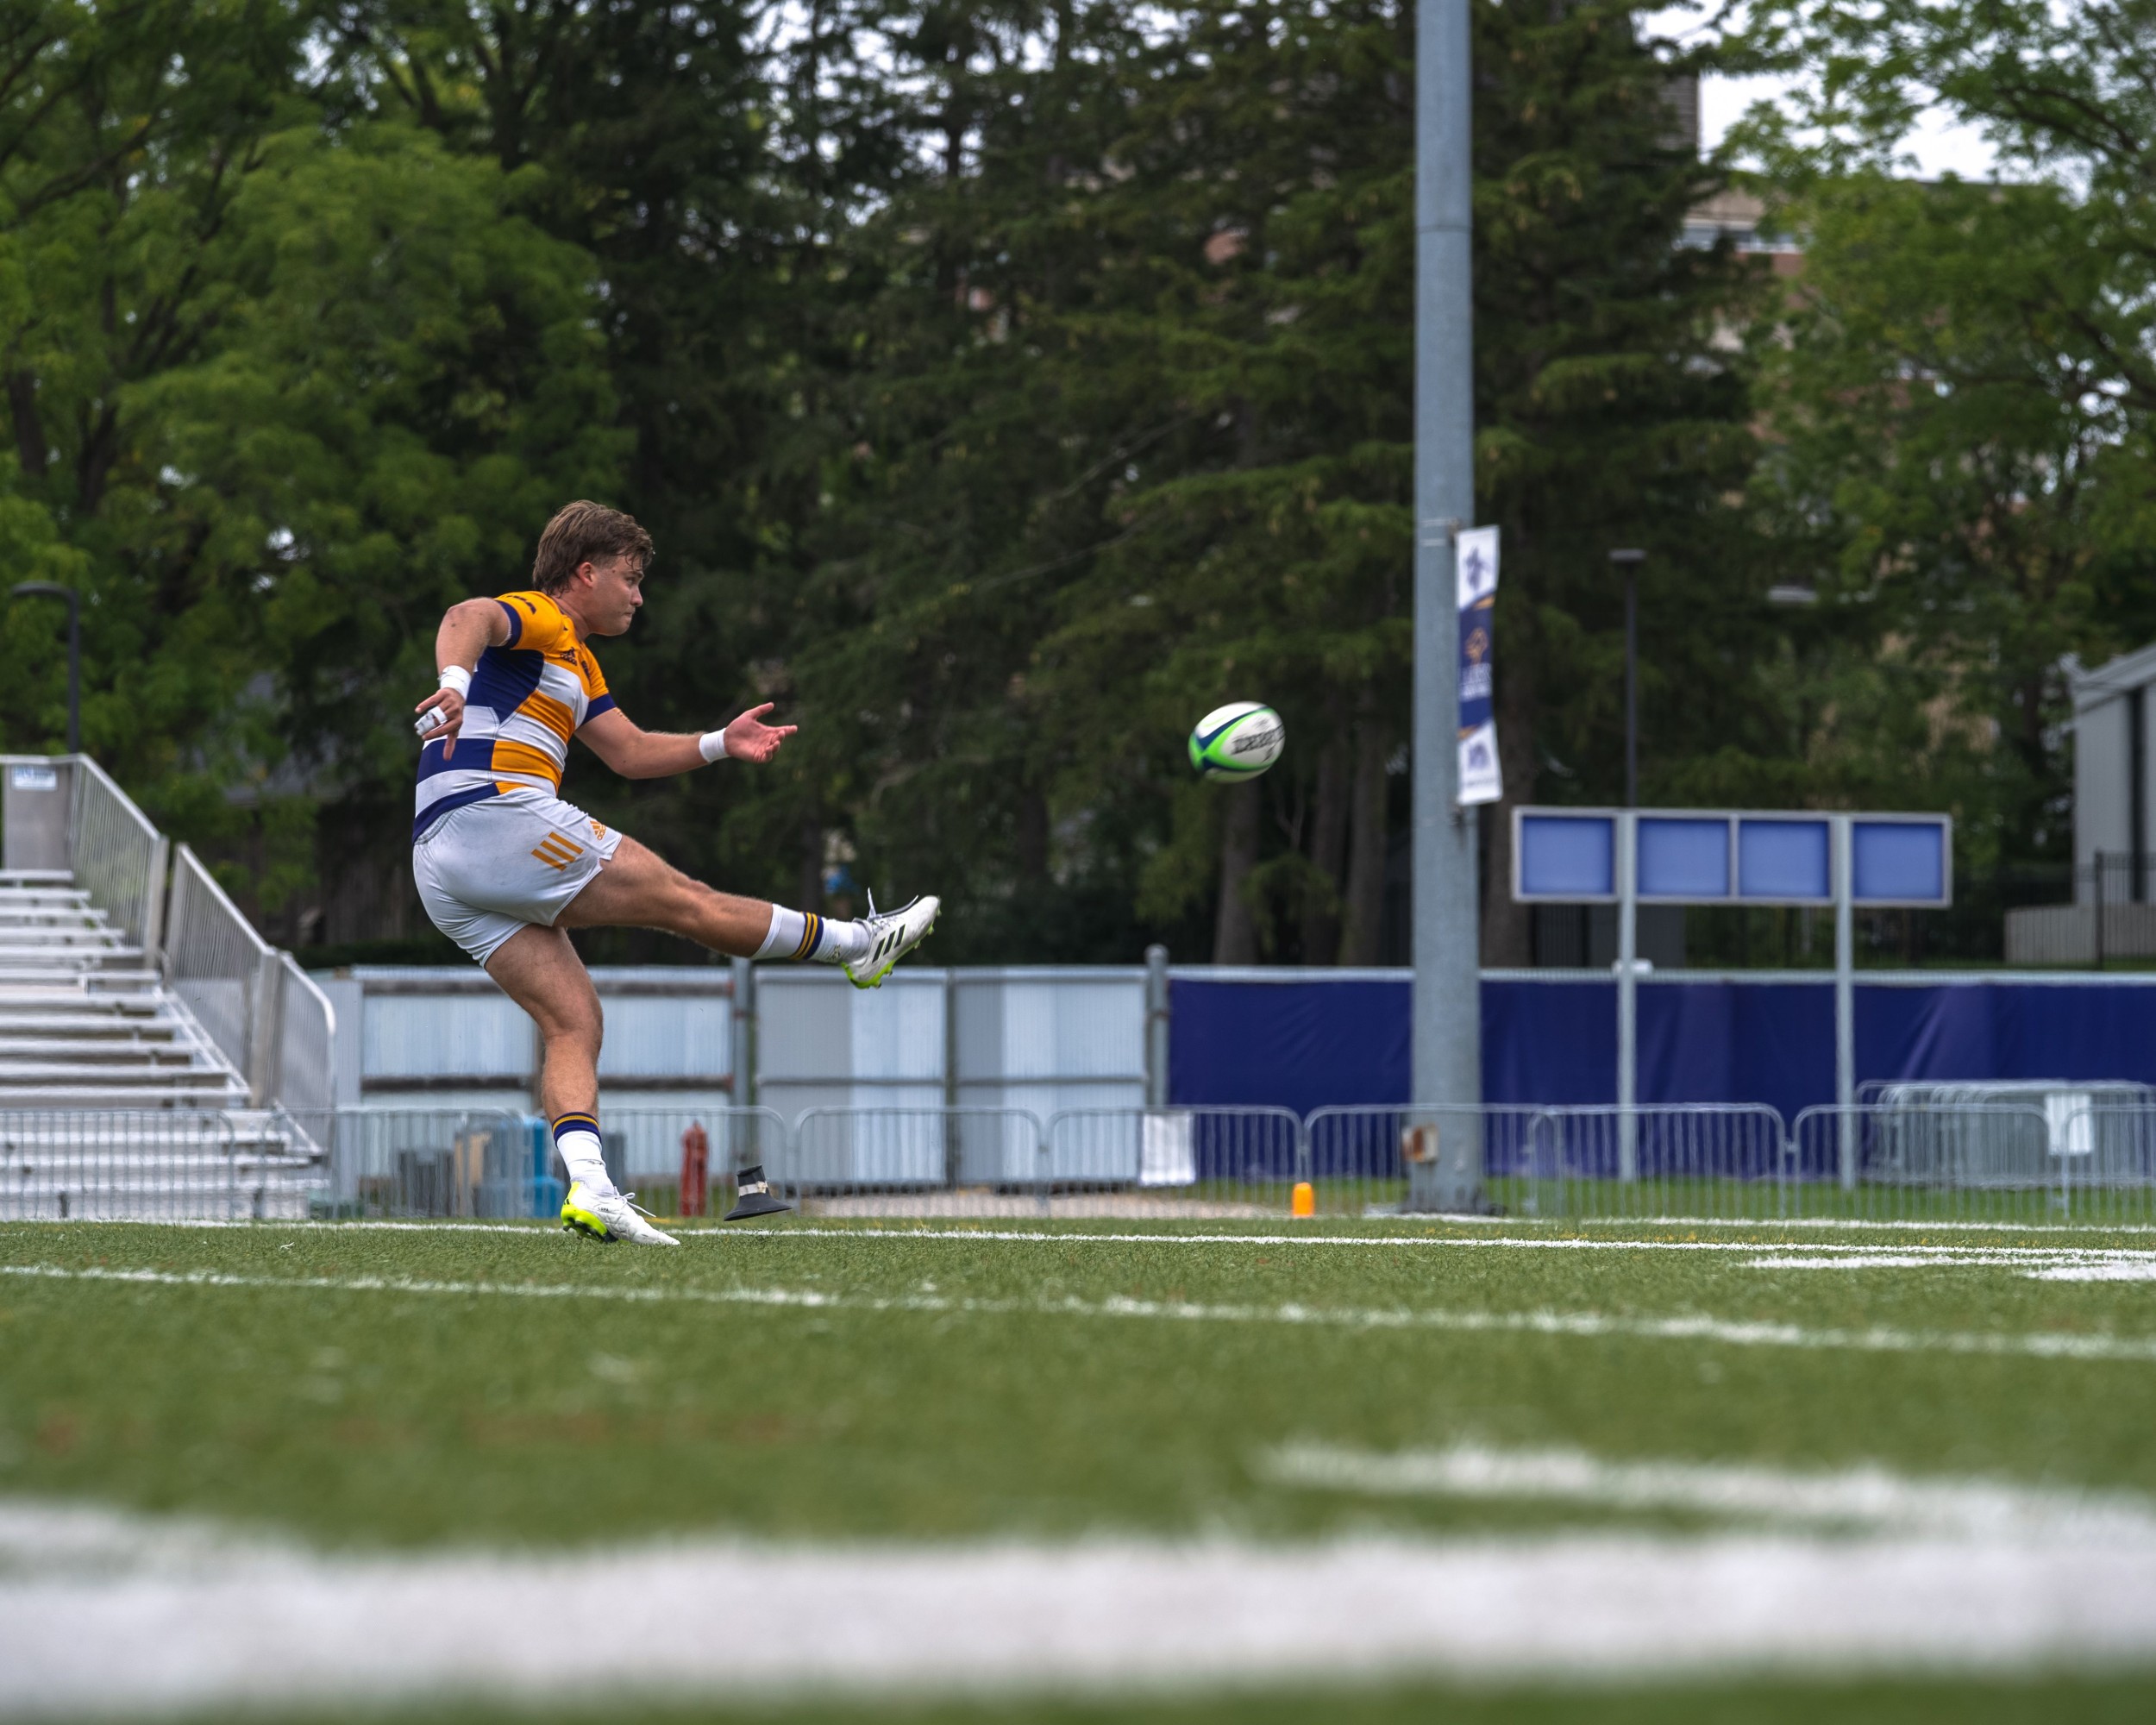 Laurier Men's rugby player kicking the ball in a conversion